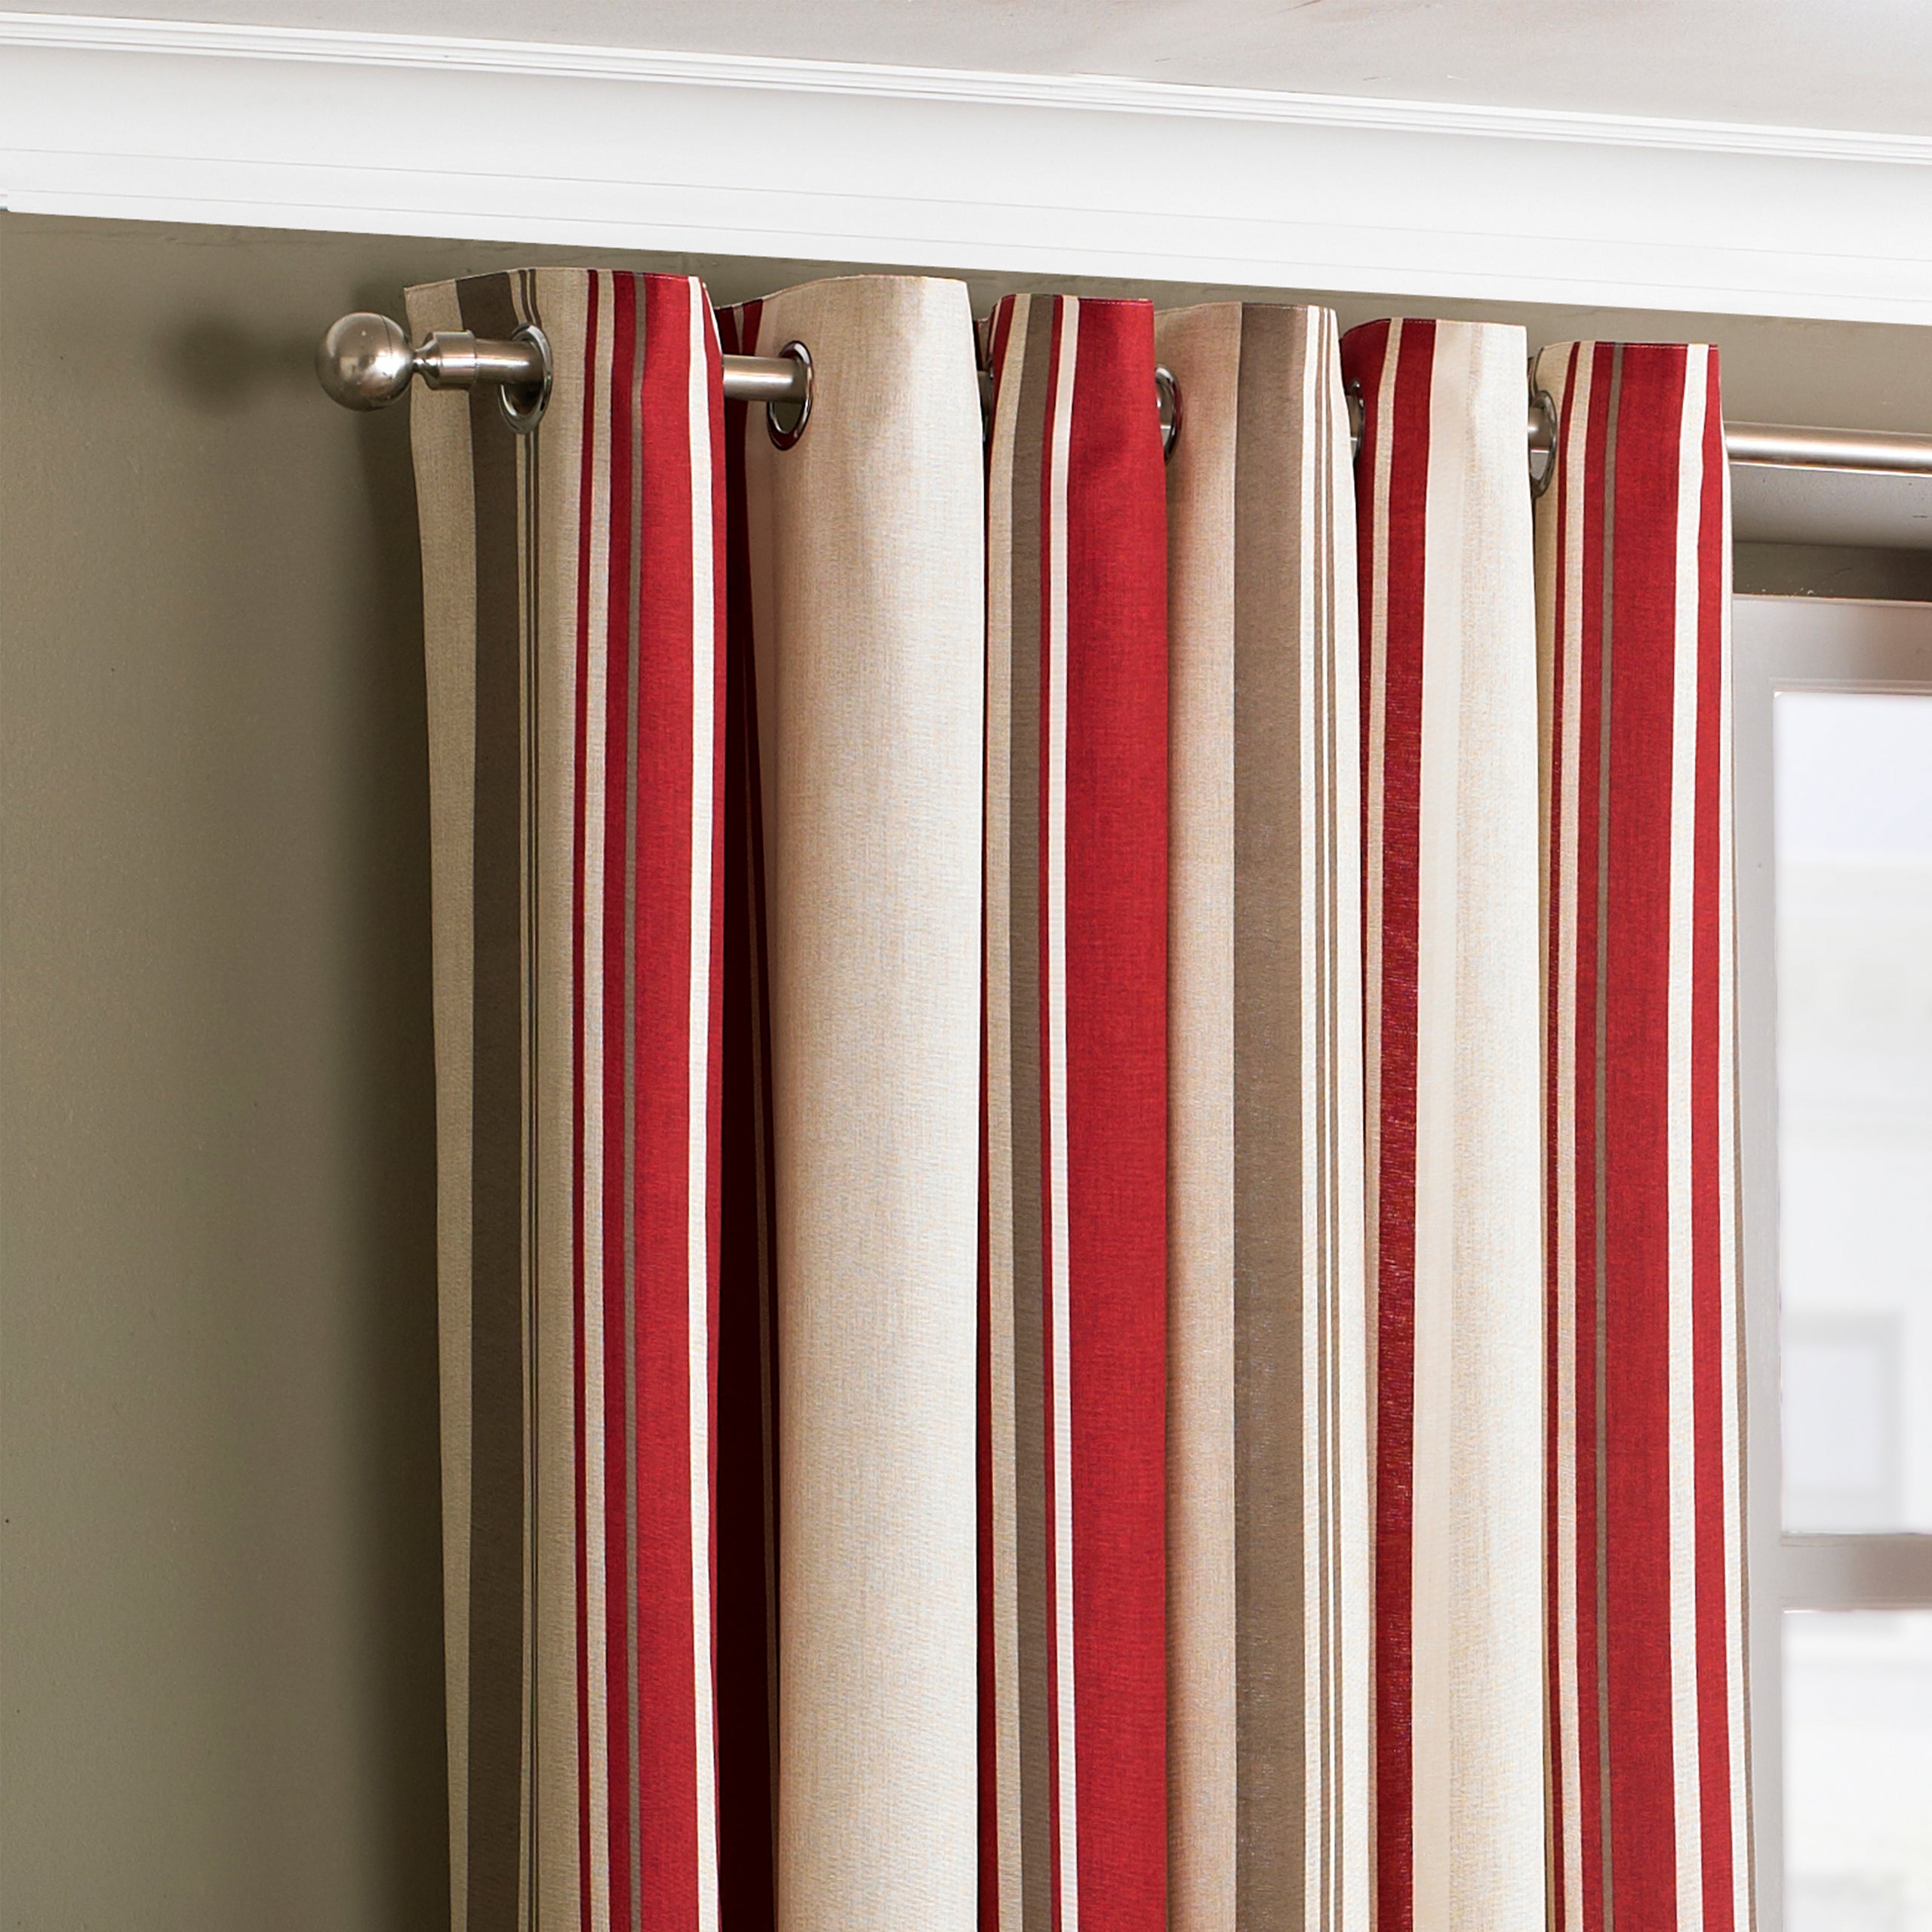 Voyage Maison Oceania Sandstone 229cm x 229cm (90x90) Fully Lined Eyelet  Ring Top Curtain Pair